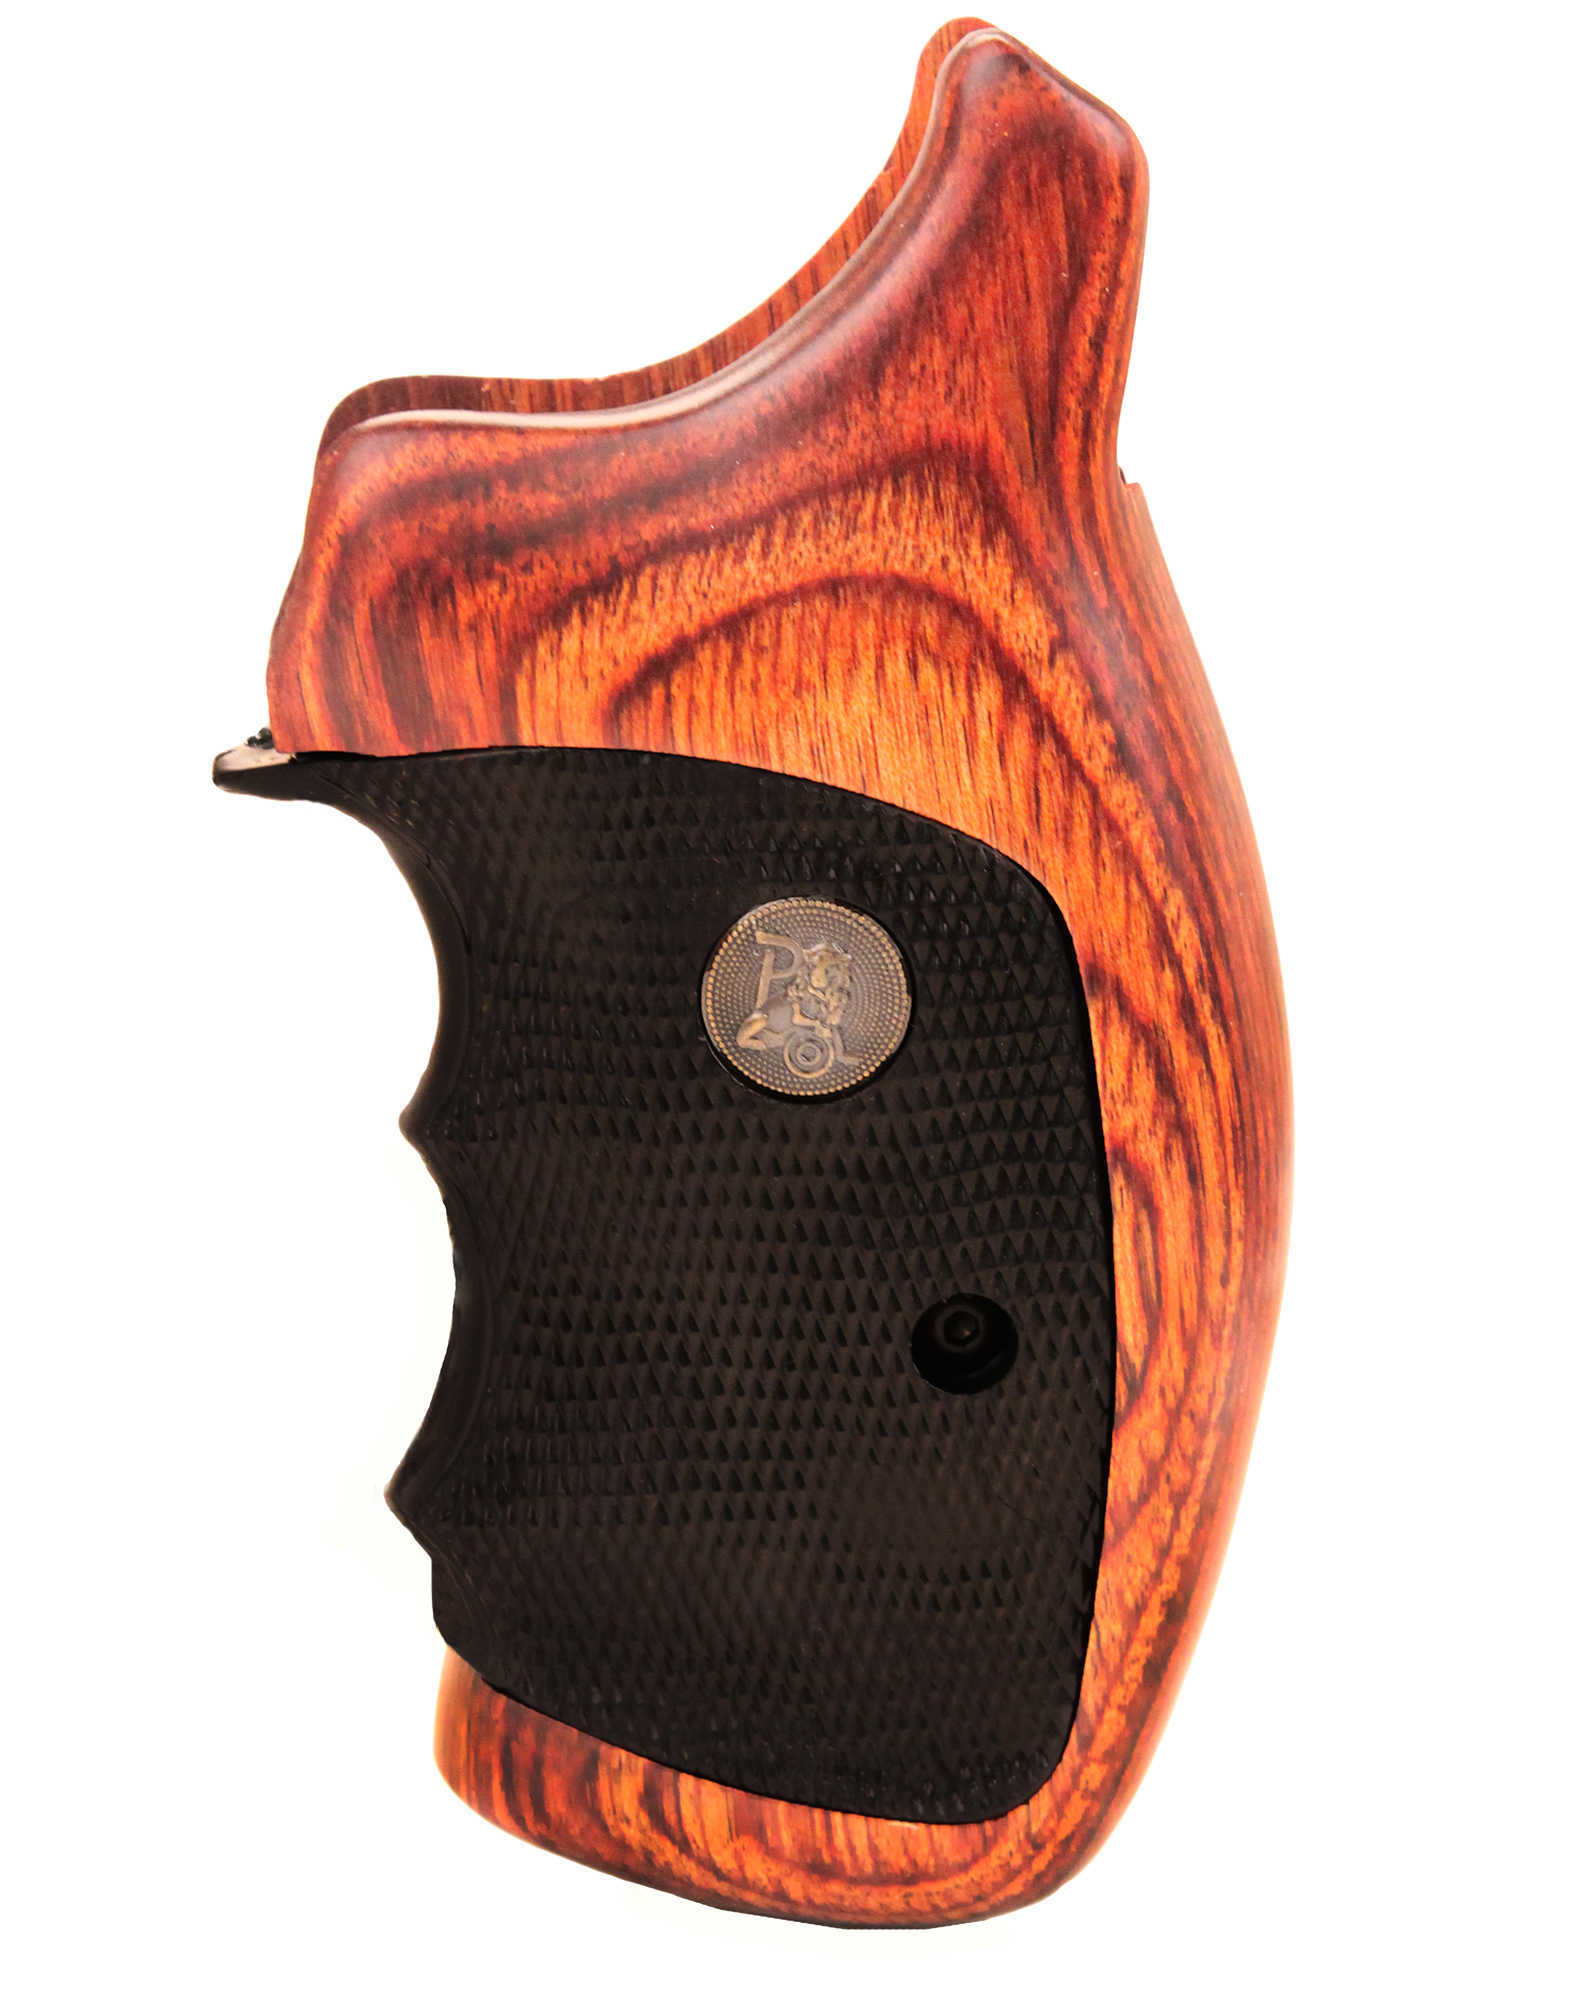 Pachmayr S&W "K&L" Frame,"Rosewood" Md: 00460